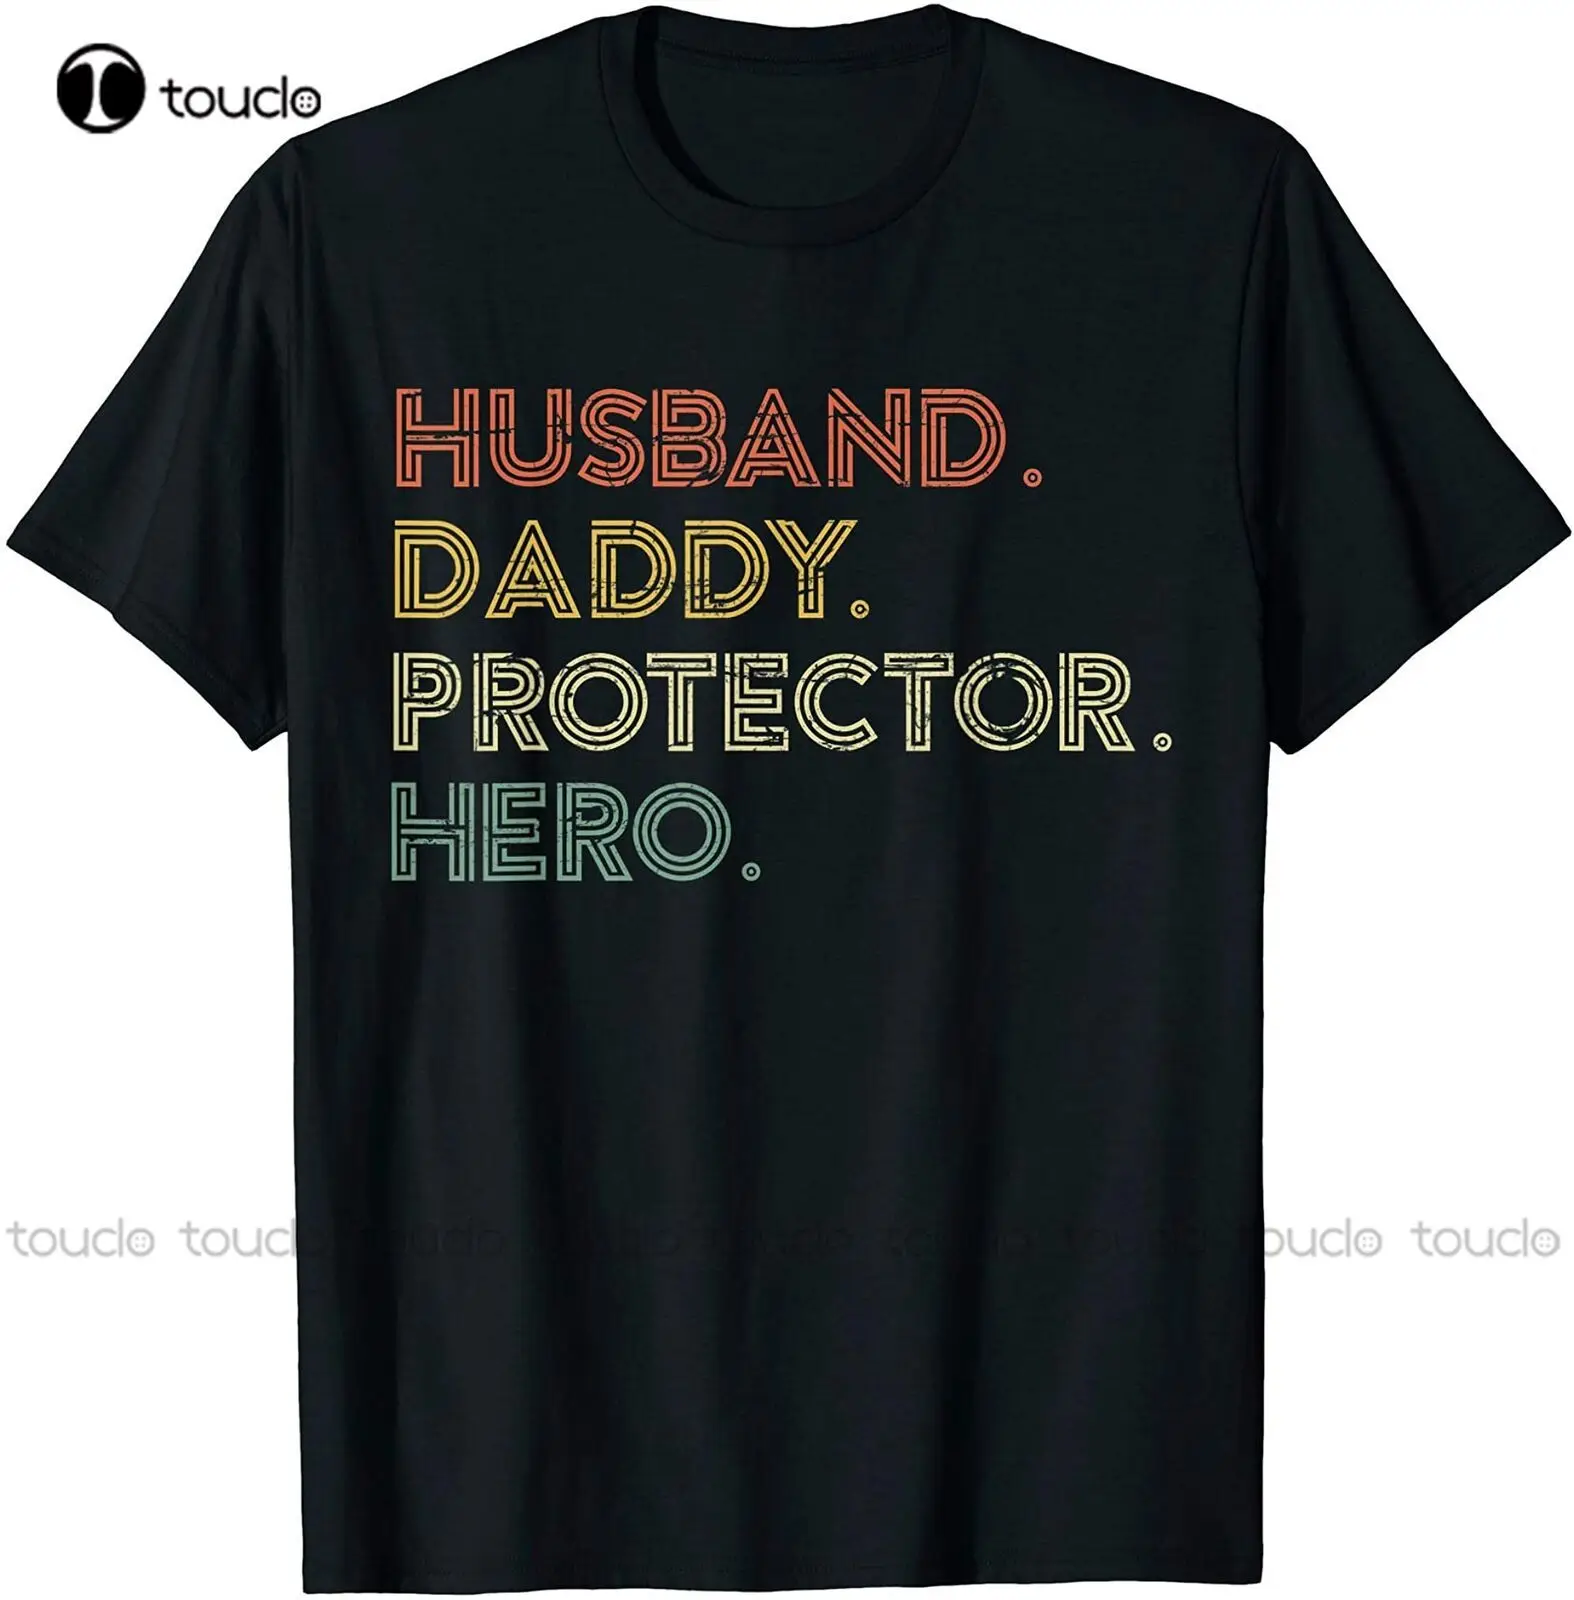 

Mens Husband Daddy Protector Hero Cute Fathers Day Gift From Wife T-Shirt Funny Unisex Women Men Tee Shirt